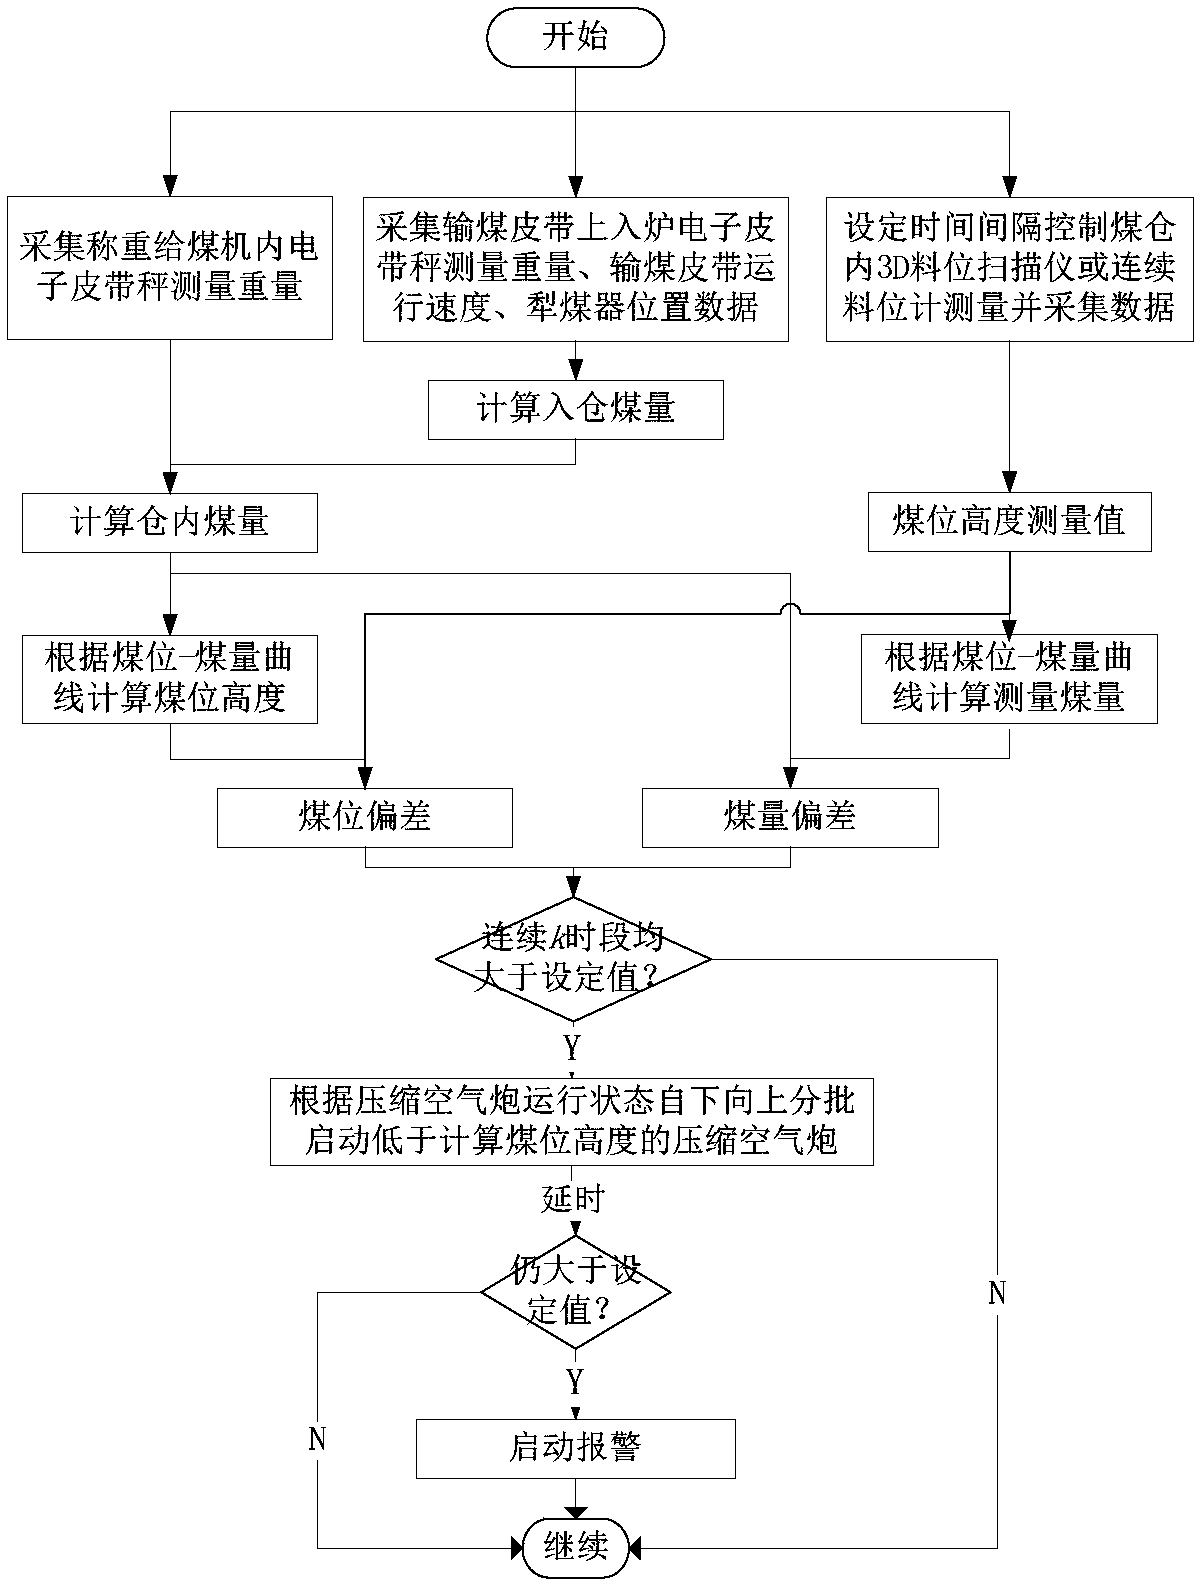 Control system and method for automatically judging and eliminating coal blockage of raw coal bunker